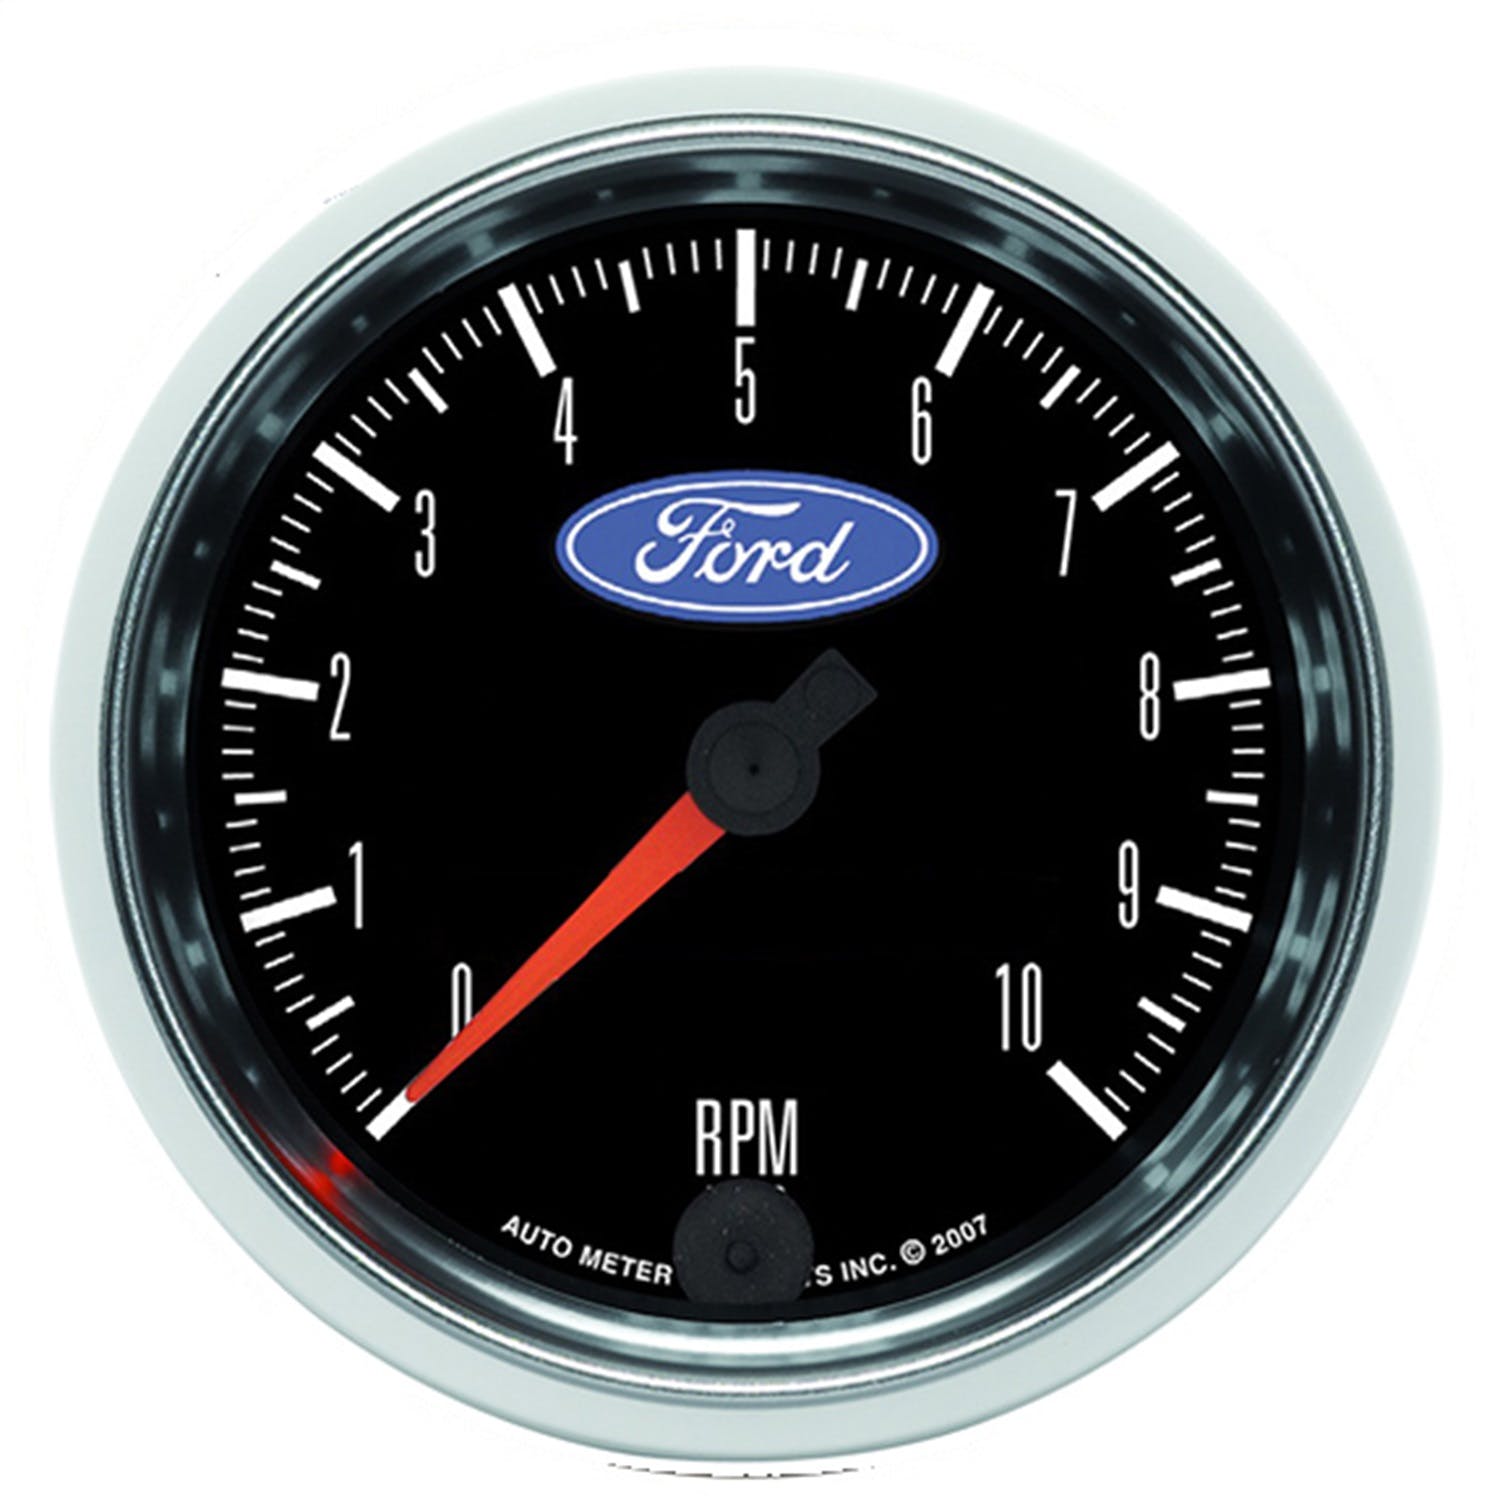 AutoMeter Products 880825 Tachometer Gauge, 3 3/4, 10K RPM, Pedestal with Ext, Quick-Lite, Ford